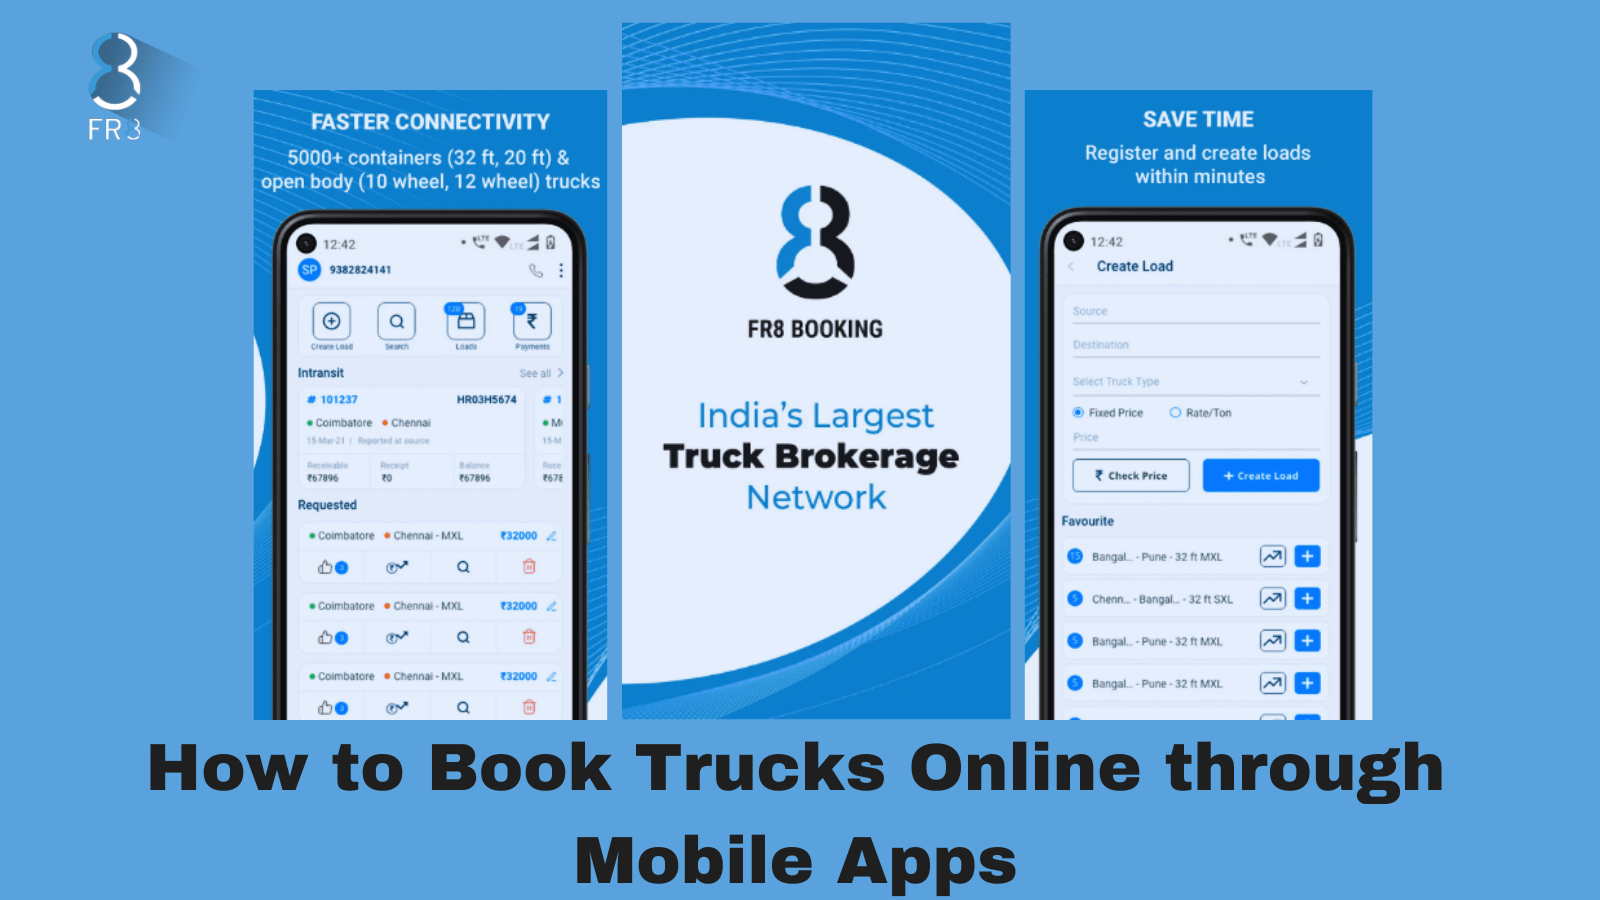 How To Book Trucks Online Through Mobile Apps